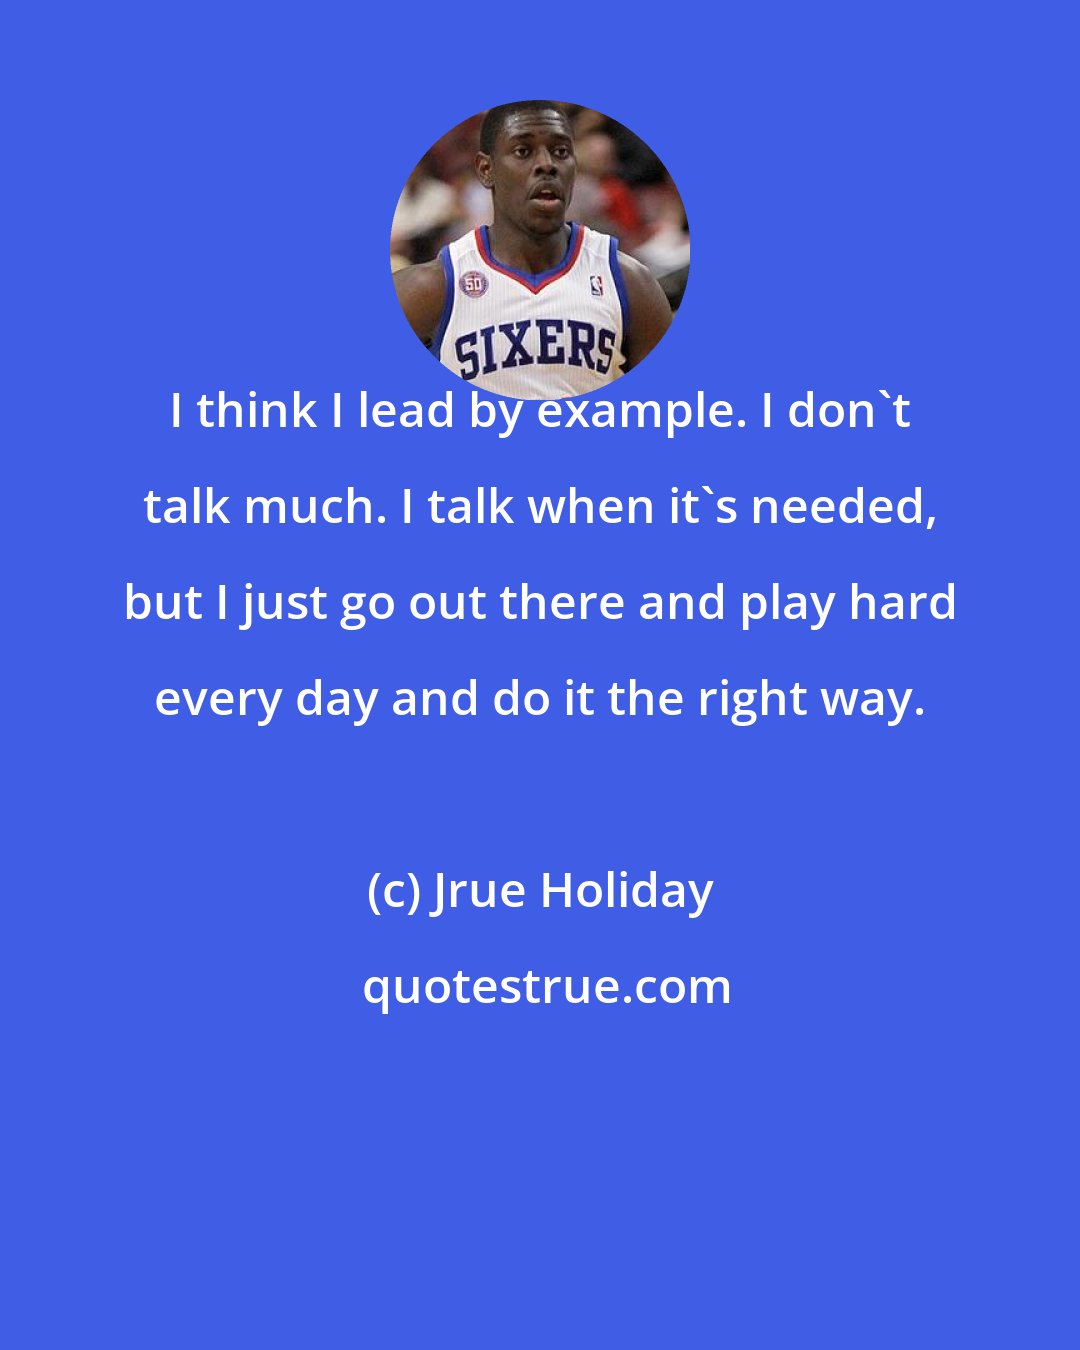 Jrue Holiday: I think I lead by example. I don't talk much. I talk when it's needed, but I just go out there and play hard every day and do it the right way.